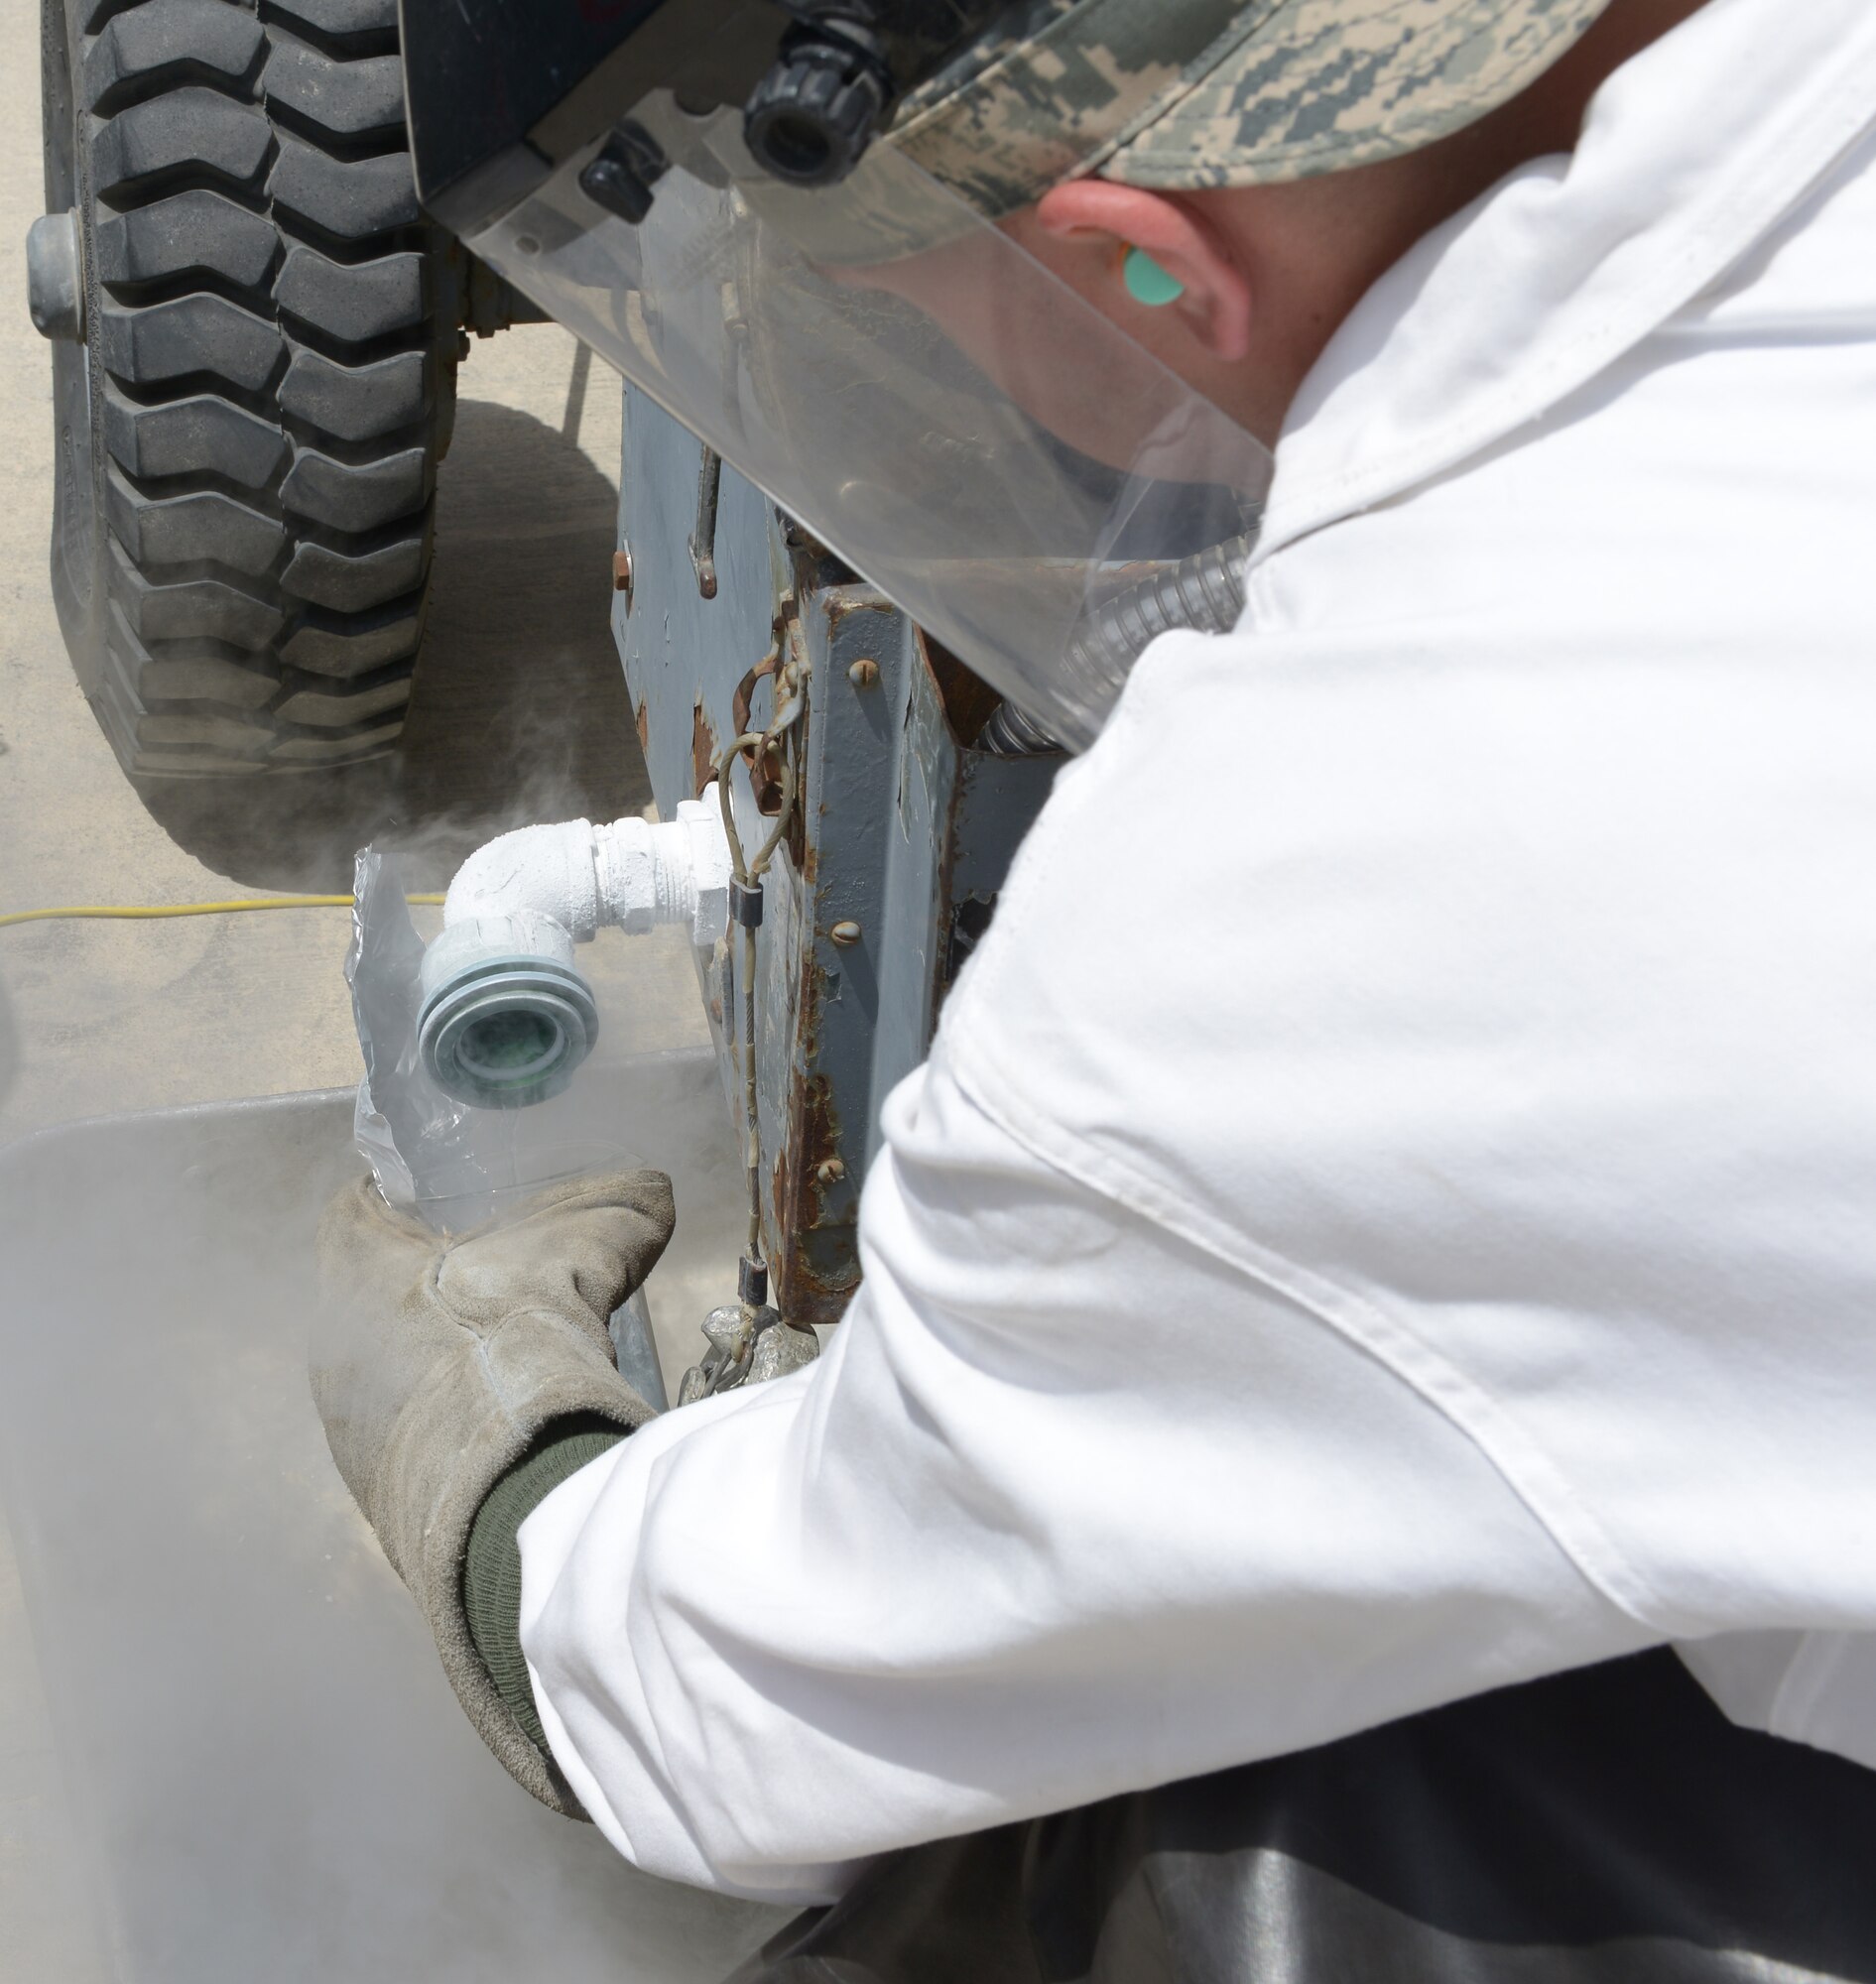 Senior Airman Aaron Megger takes a sample of liquid oxygen at Al Udeid Air Base, Qatar, April 1, 2014. Liquid oxygen is used by aviators, which is needed when reaching high altitudes. Megger is a 379th Expeditionary Logistics Readiness Squadron fuels cryogenic technician, deployed from Joint Base Charleston, S.C., and a Mansfield, Ohio, native. (U.S. Air Force photo/Senior Airman Hannah Landeros)